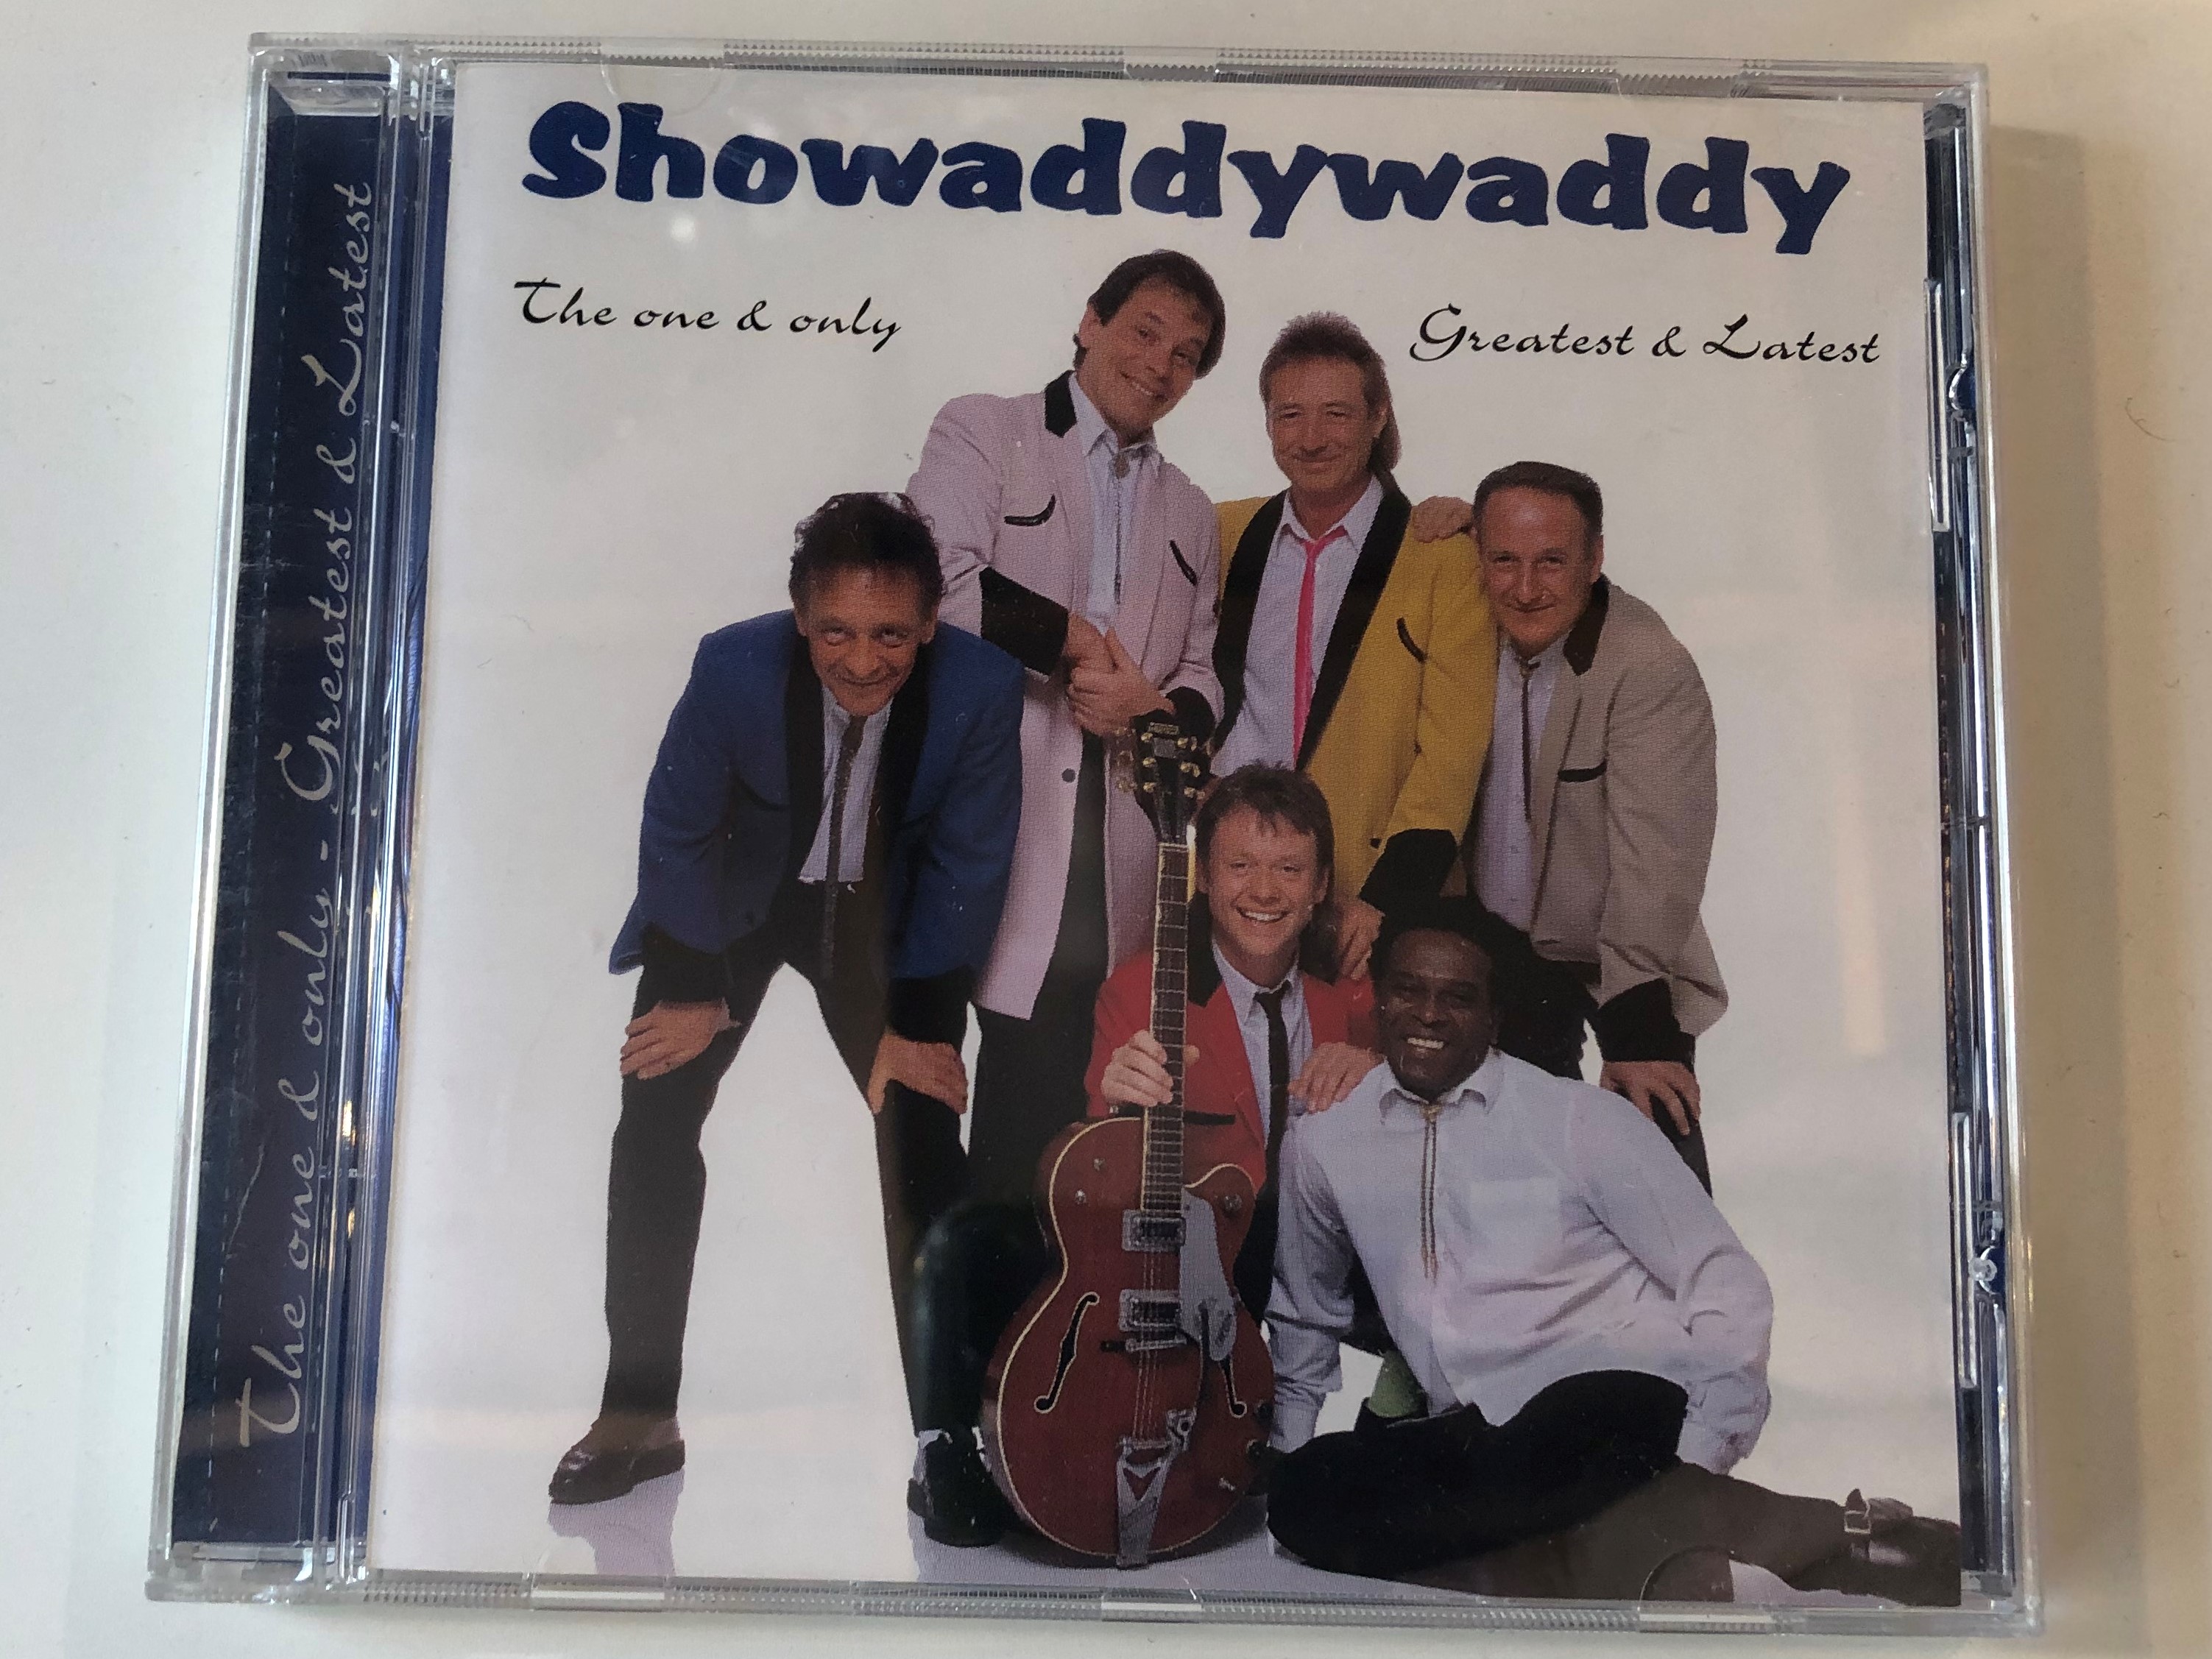 showaddywaddy-the-one-only.-greatest-latest-cmc-records-audio-cd-1996-0724352159925-1-.jpg